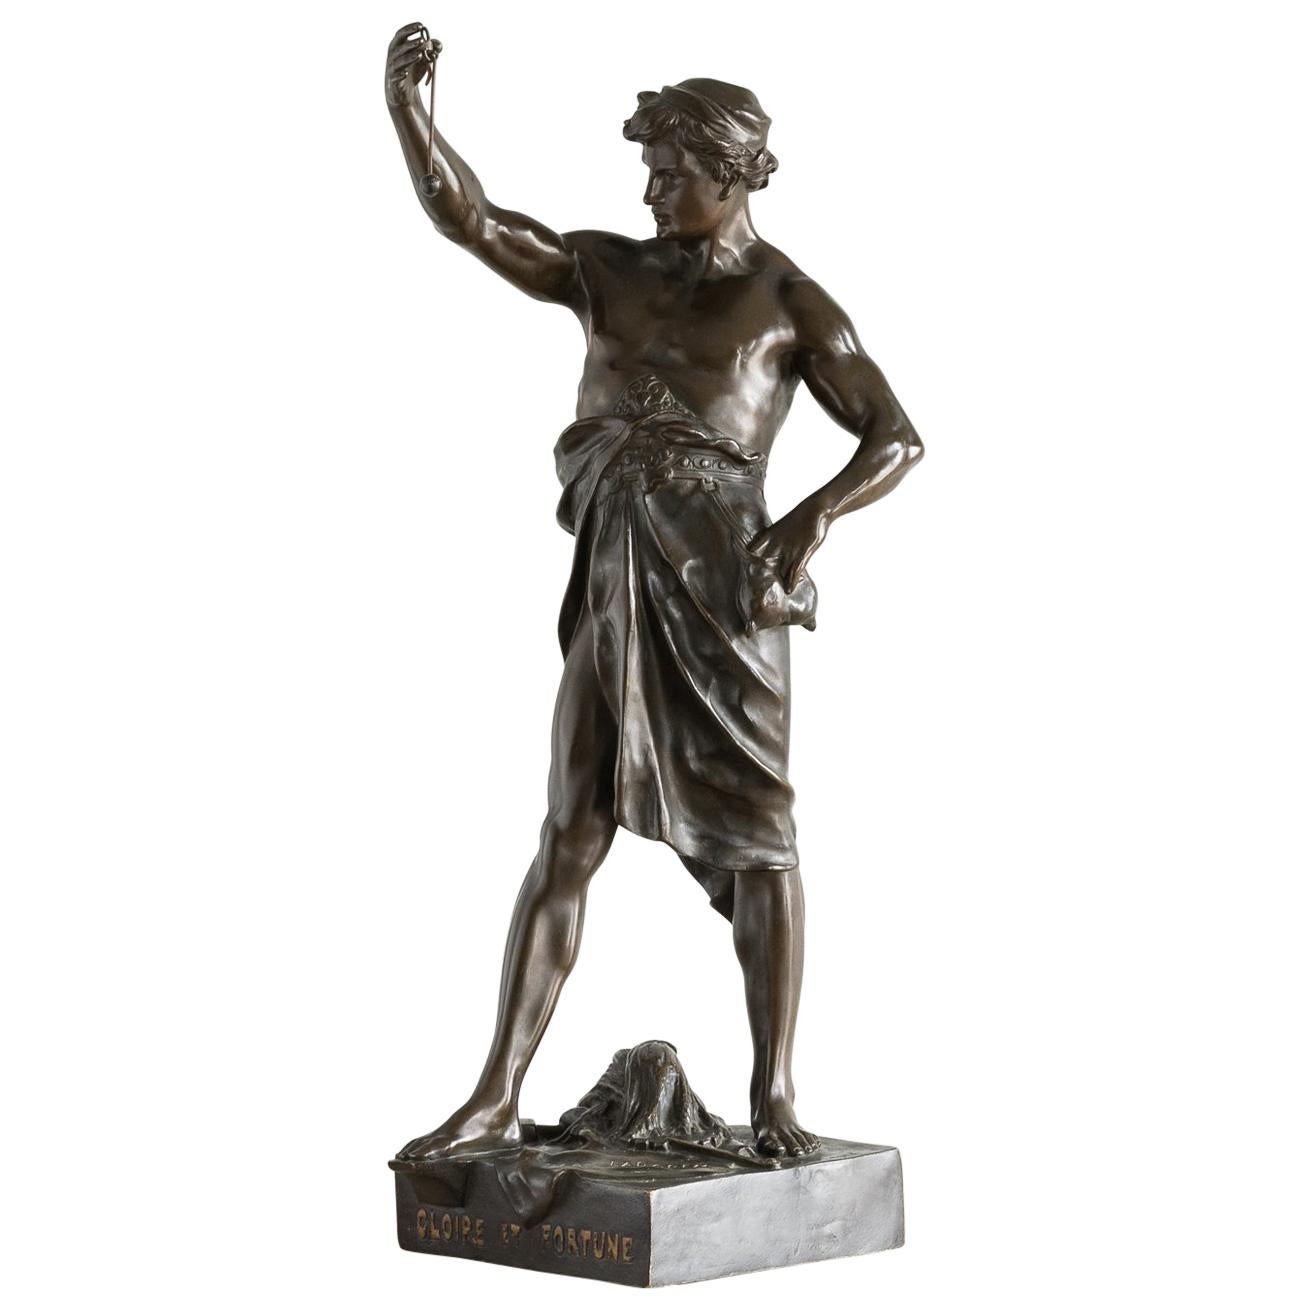 French Bronze Figure of 'Glory and Fortune'